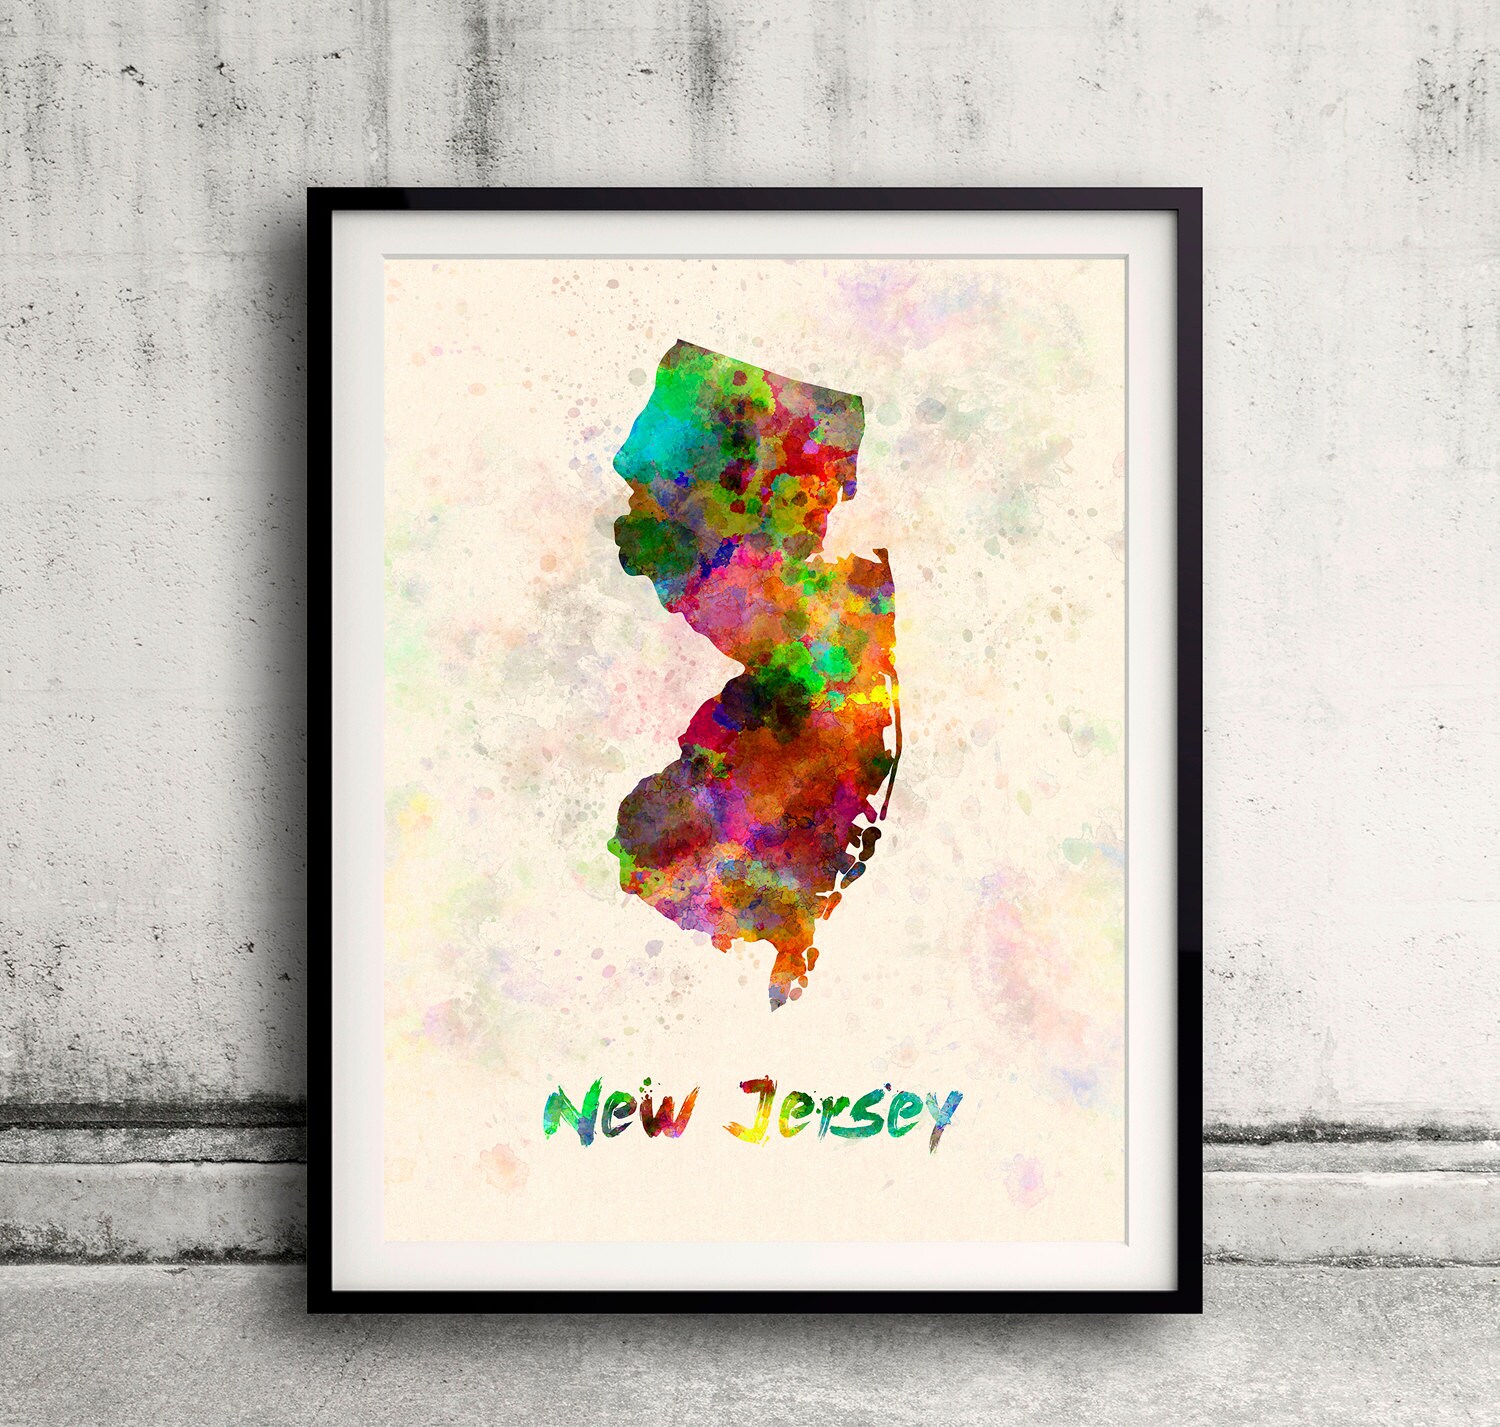 New Jersey Us State in Watercolor Background 8x10 In. To 12x16 Poster Digital Wall Art Illustration Print Art Decorative - Sku 0417